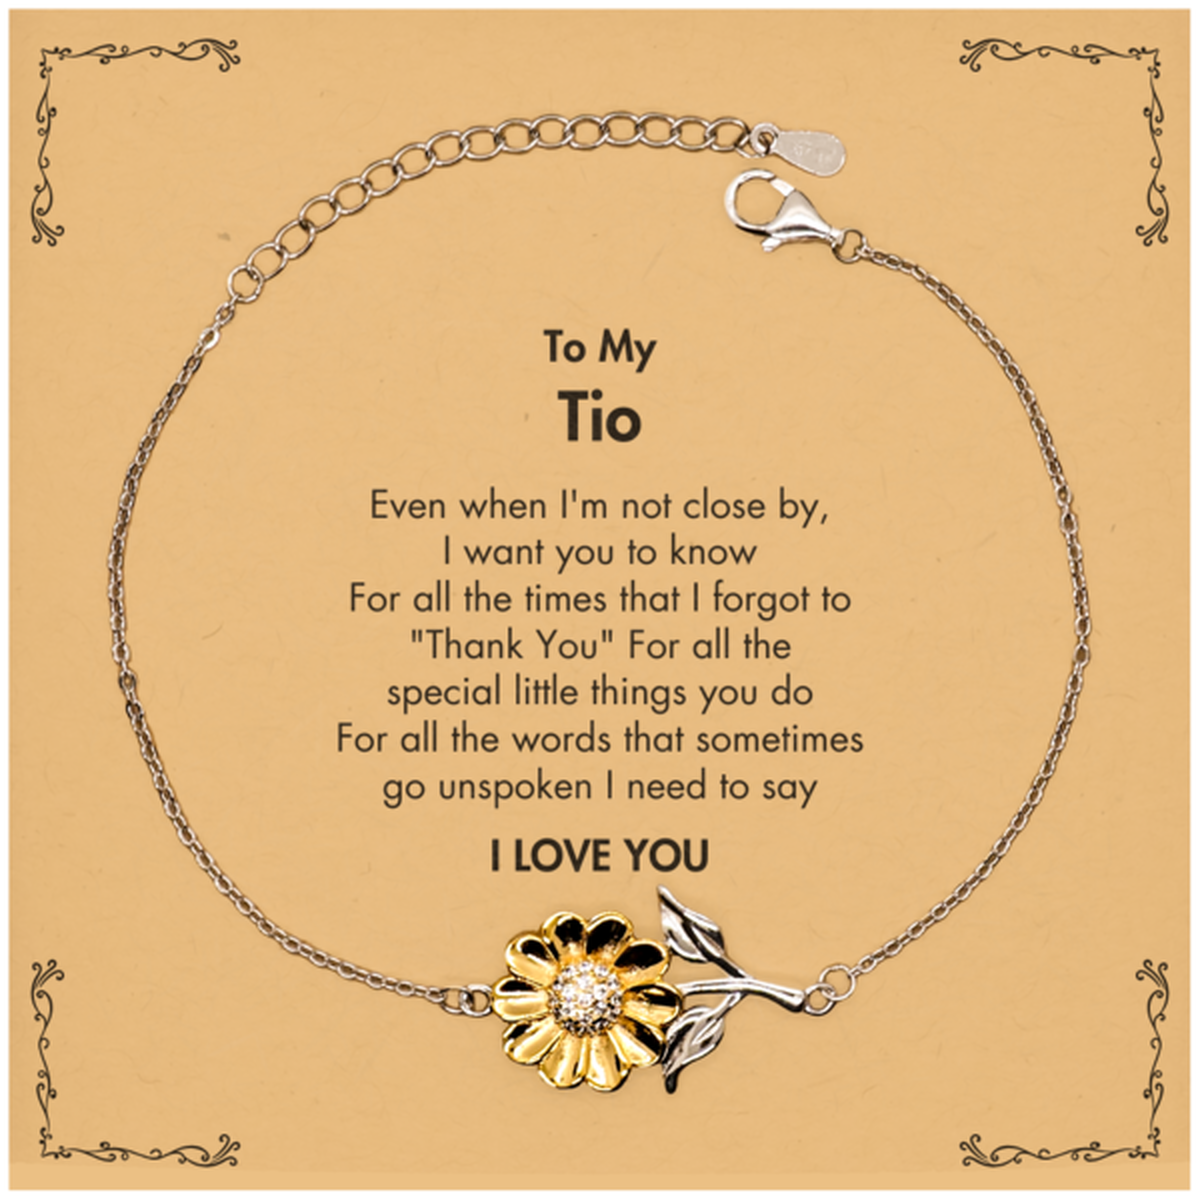 Thank You Gifts for Tio, Keepsake Sunflower Bracelet Gifts for Tio Birthday Mother's day Father's Day Tio For all the words That sometimes go unspoken I need to say I LOVE YOU